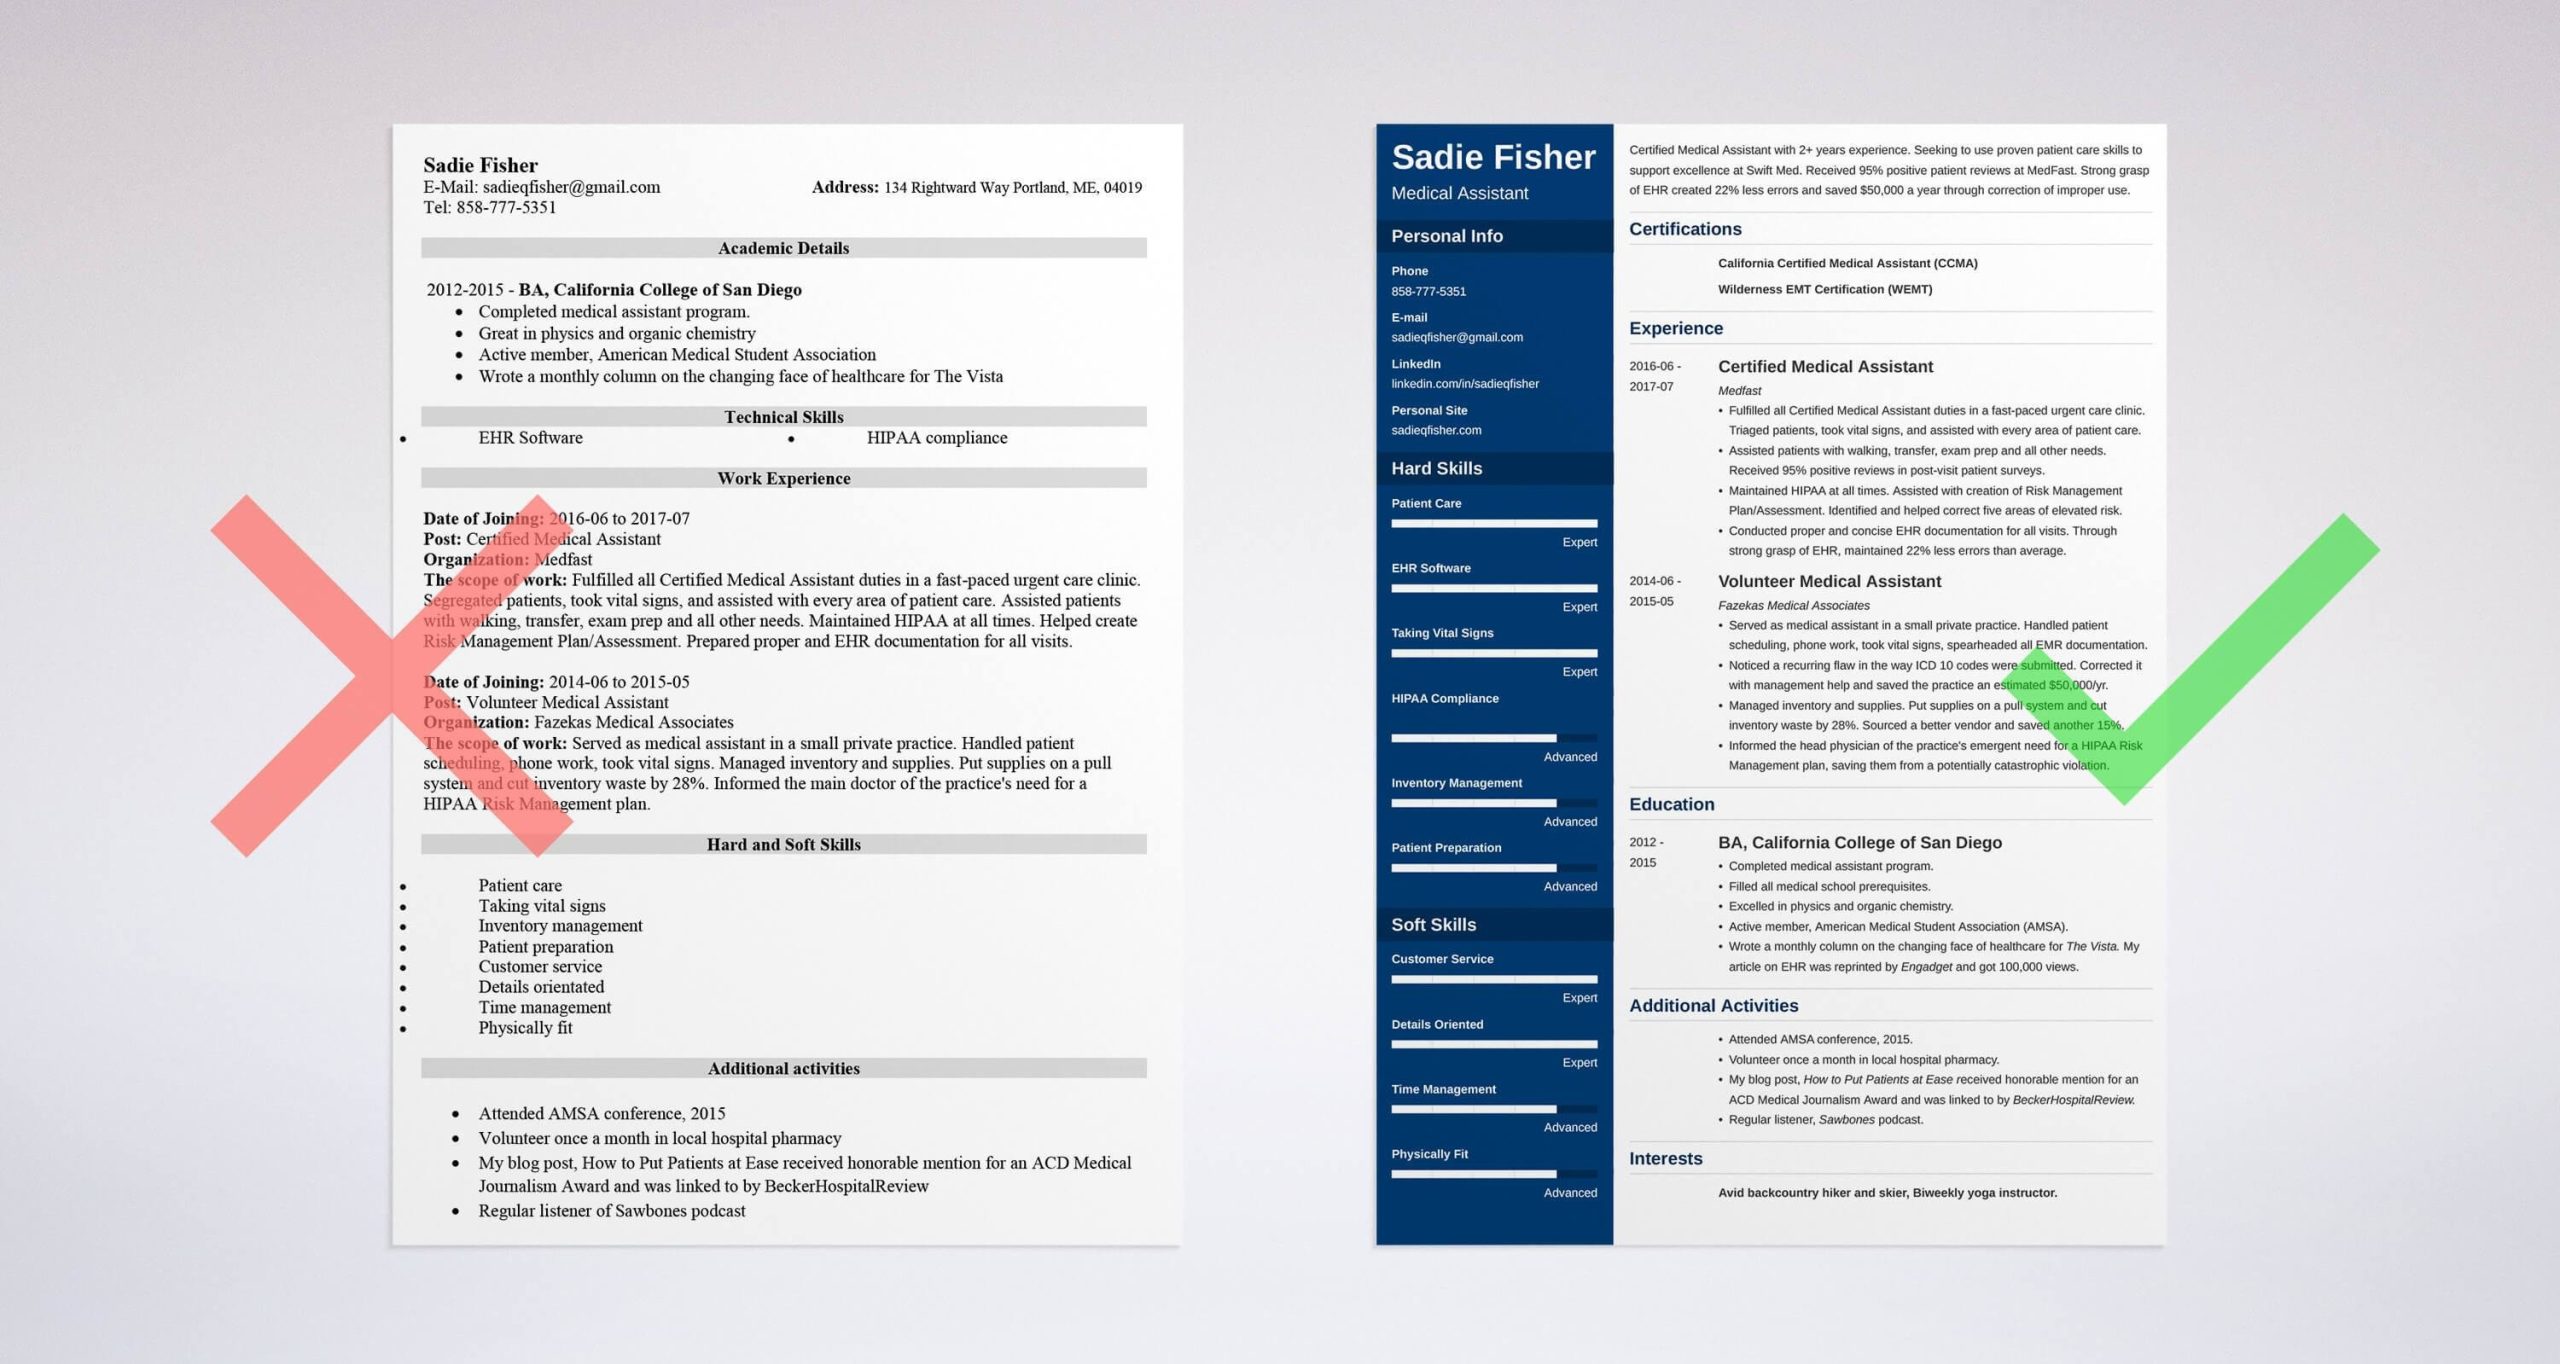 Sample Resume for after Medical School Medical assistant Resume Examples: Duties, Skills & Template